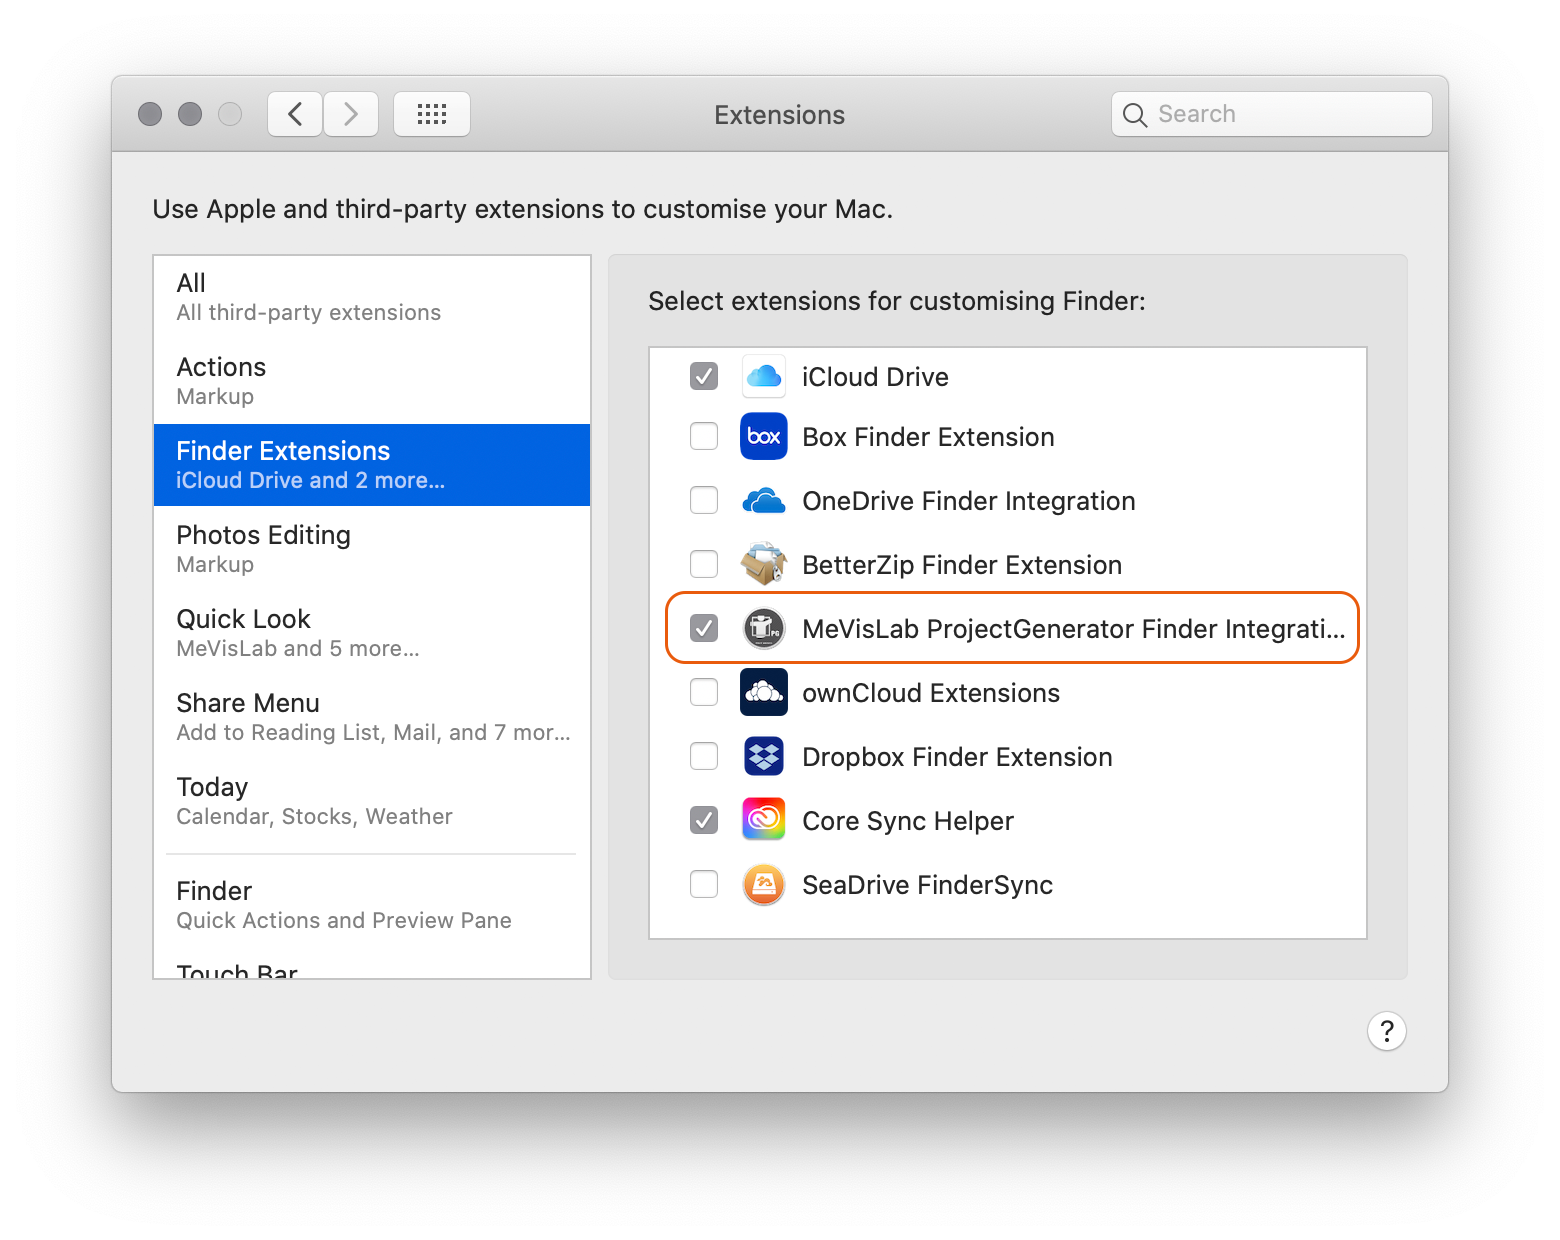 Controlling the display of contextual menu items in Finder